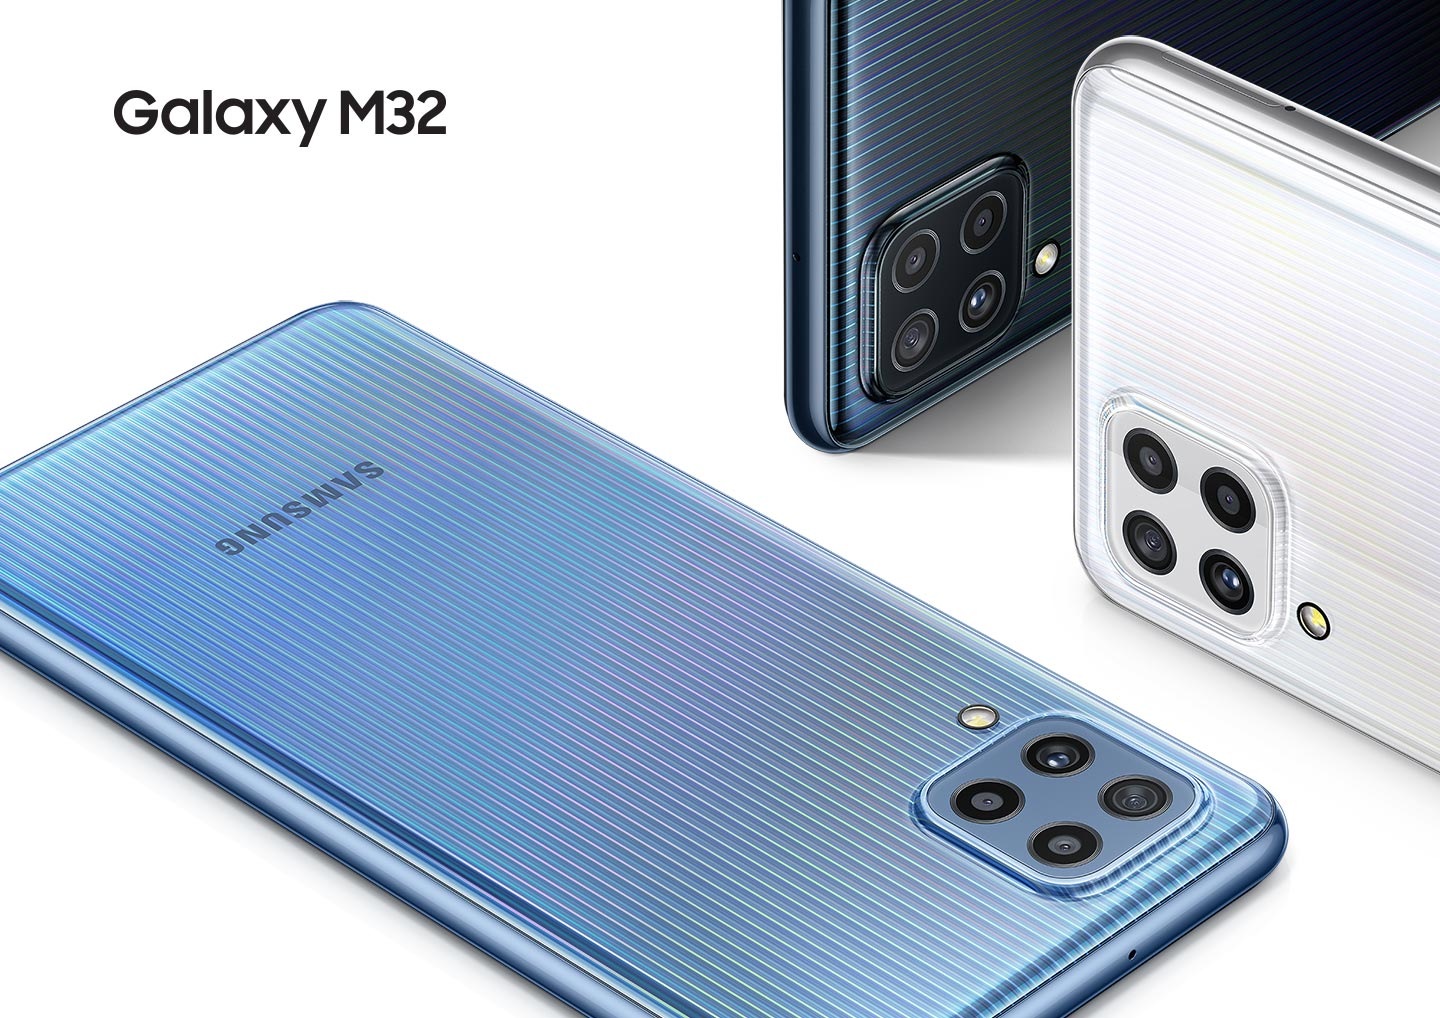 Three Galaxy M32 phones are displayed; sky blue one seen from the rear with the front screen facing down.
The black and white ones are laying on the side with just a small part of the devices showing.